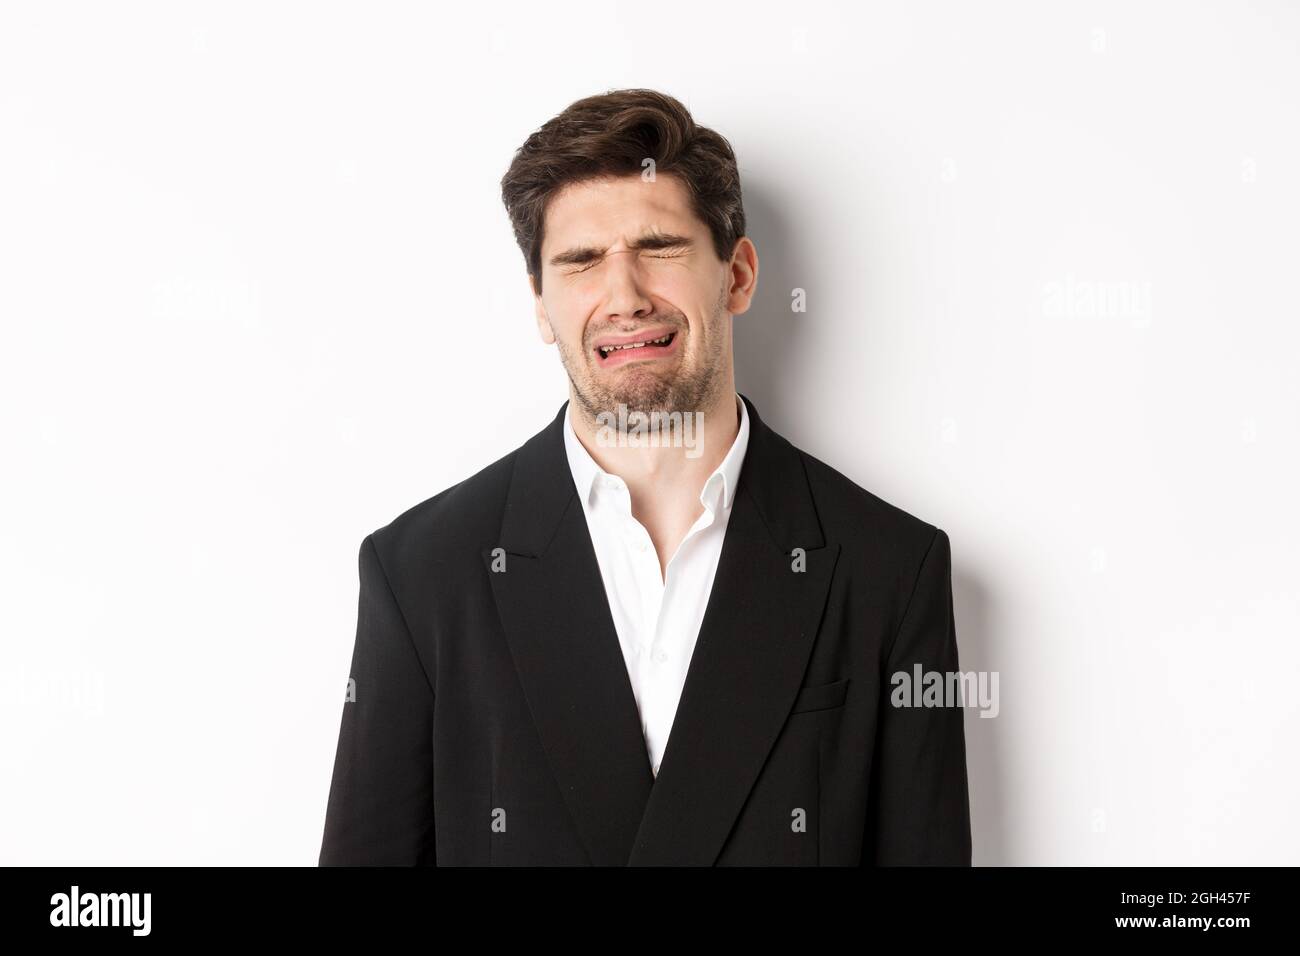 Close-up of miserable man in suit, crying and sobbing, feeling sad, standing against white background Stock Photo